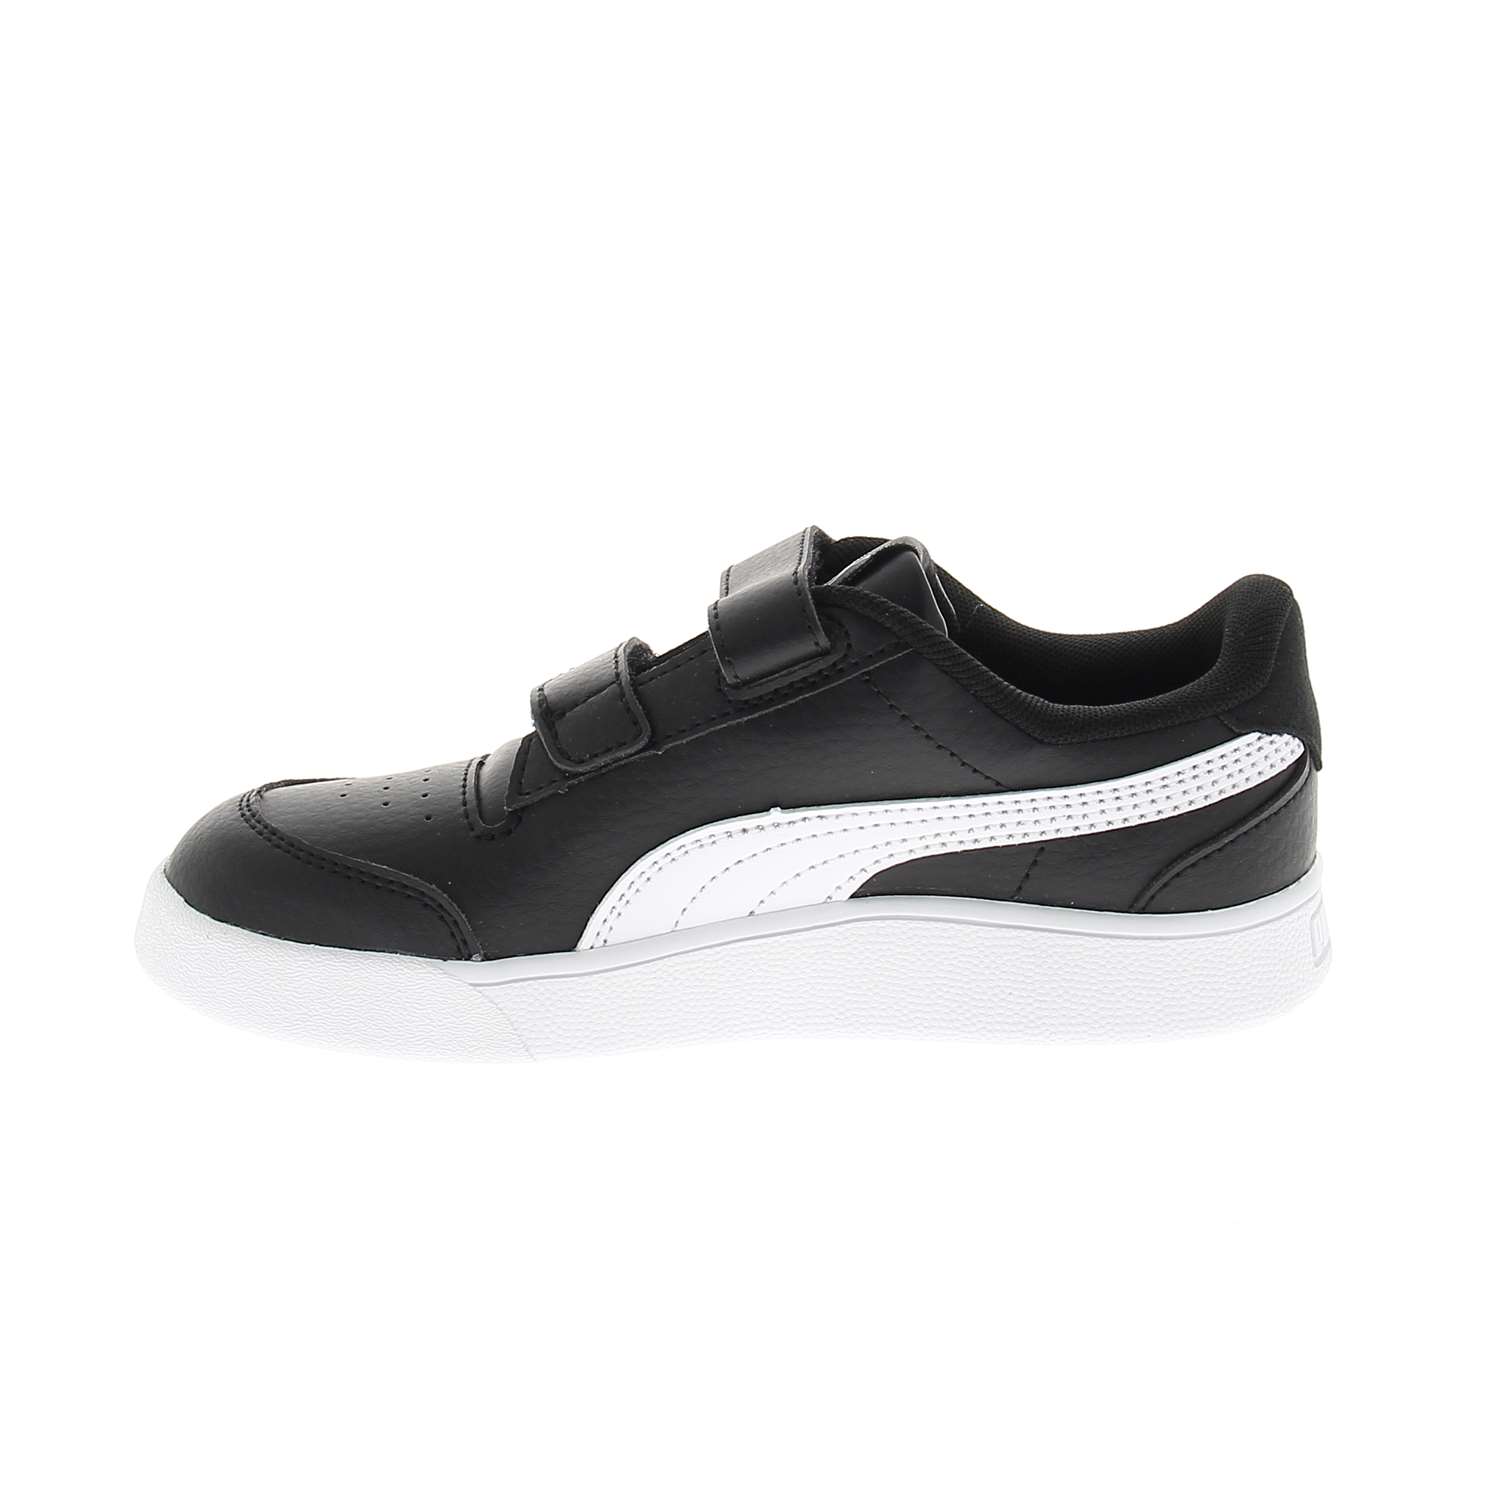 05 - SHUFFLE V INF PS - PUMA - Baskets - Synthétique